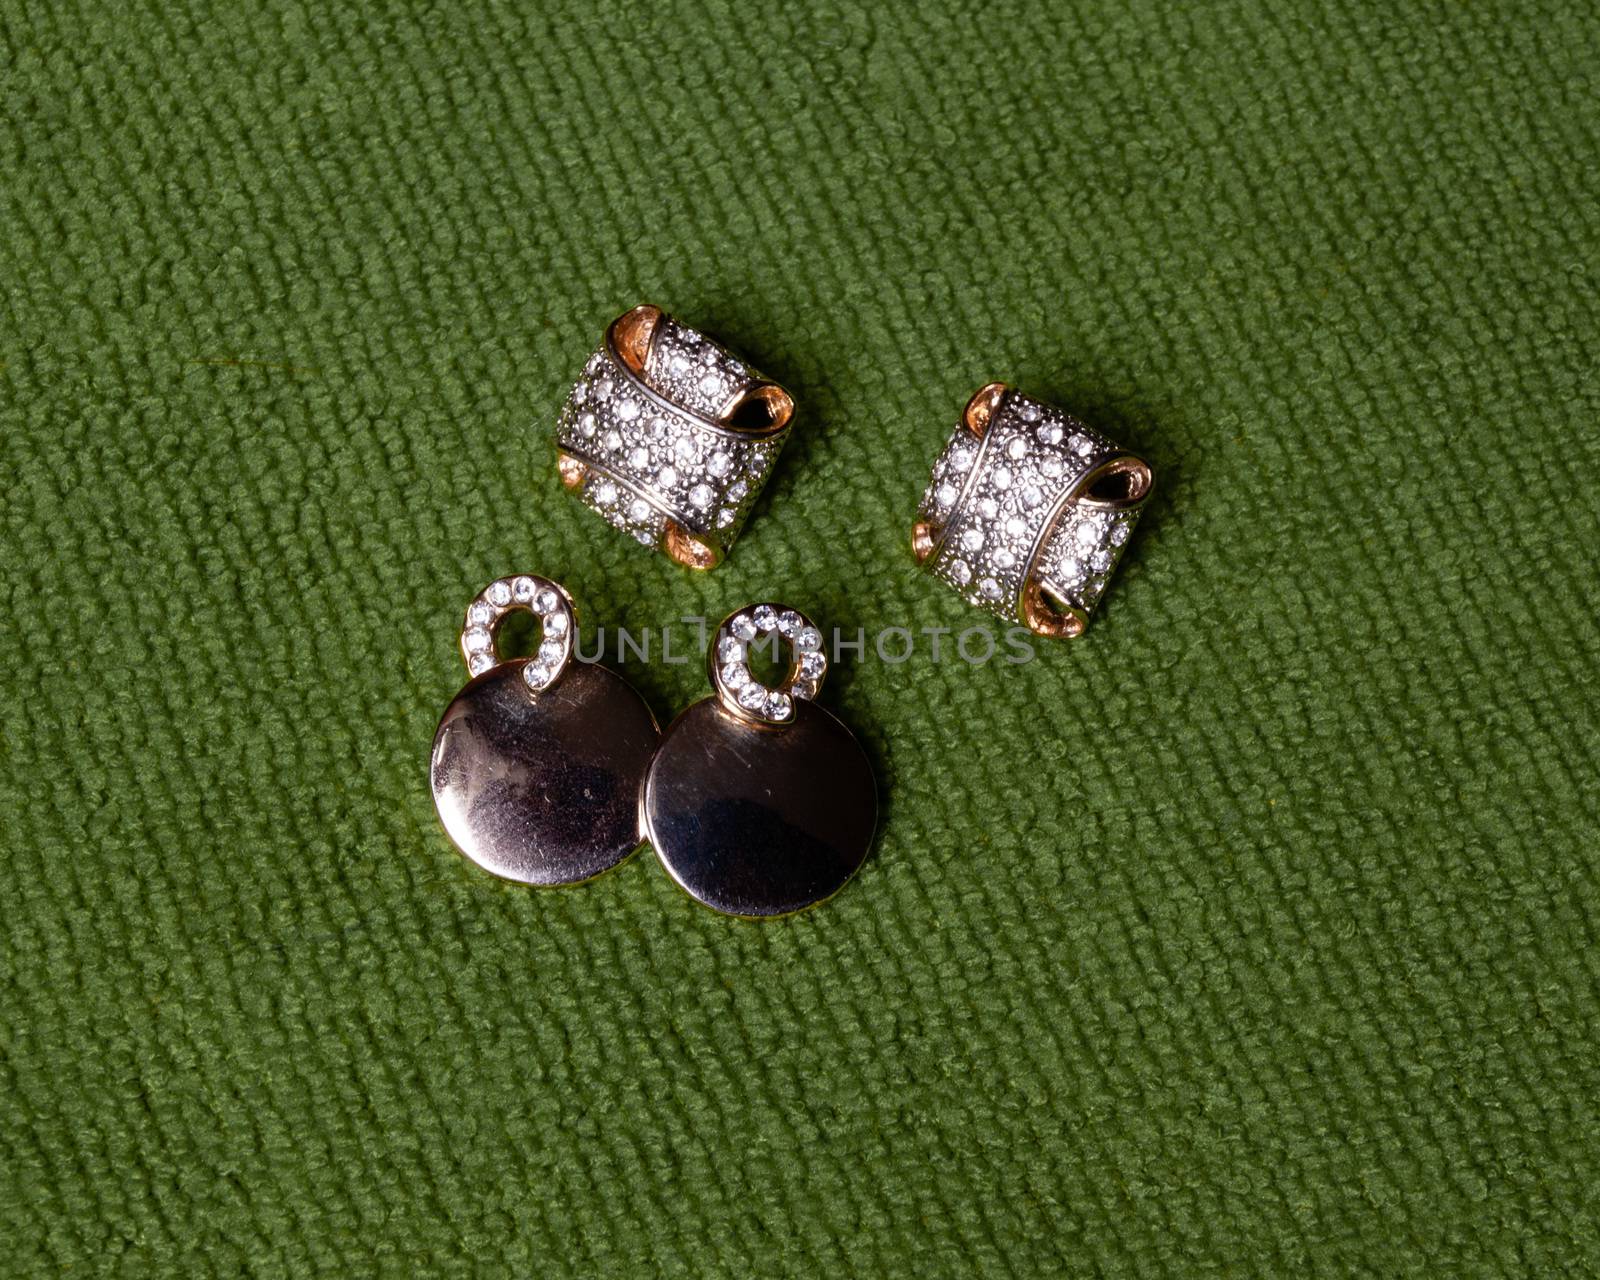 Gold jewelry, earrings lie on a green background